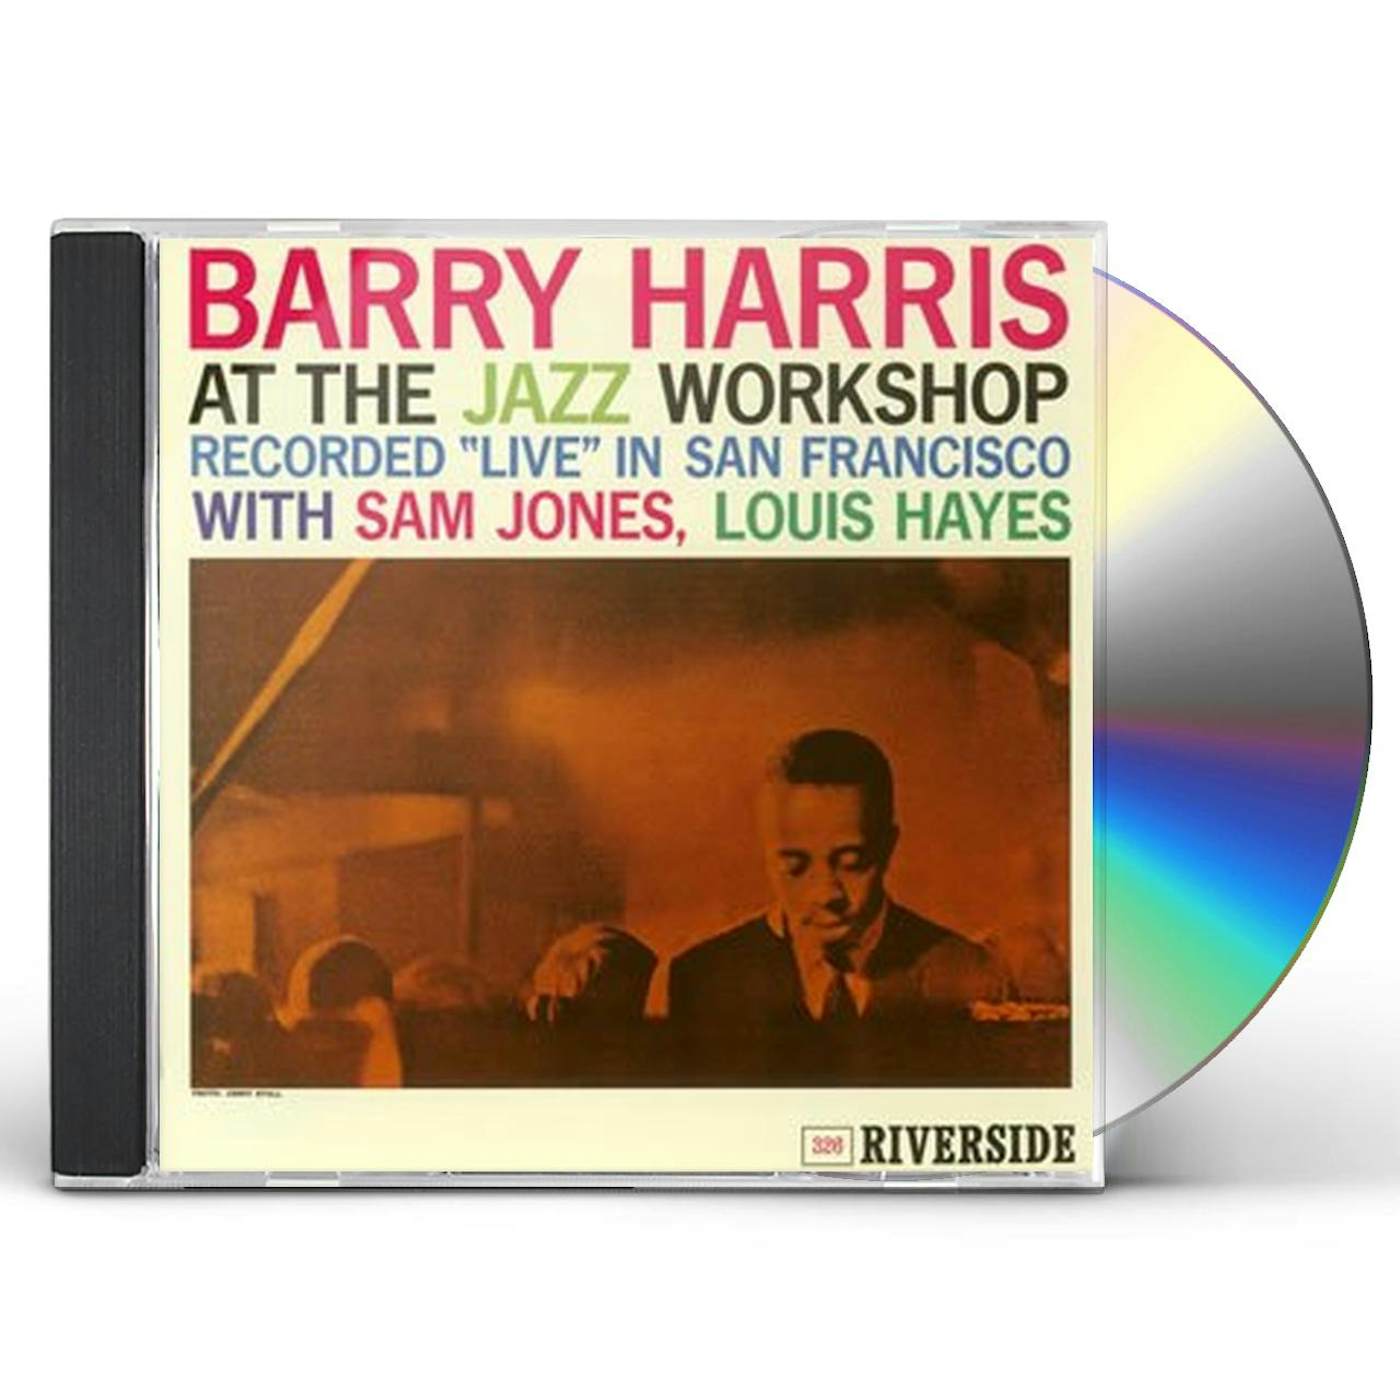 Barry Harris AT THE JAZZ WORKSHOP CD